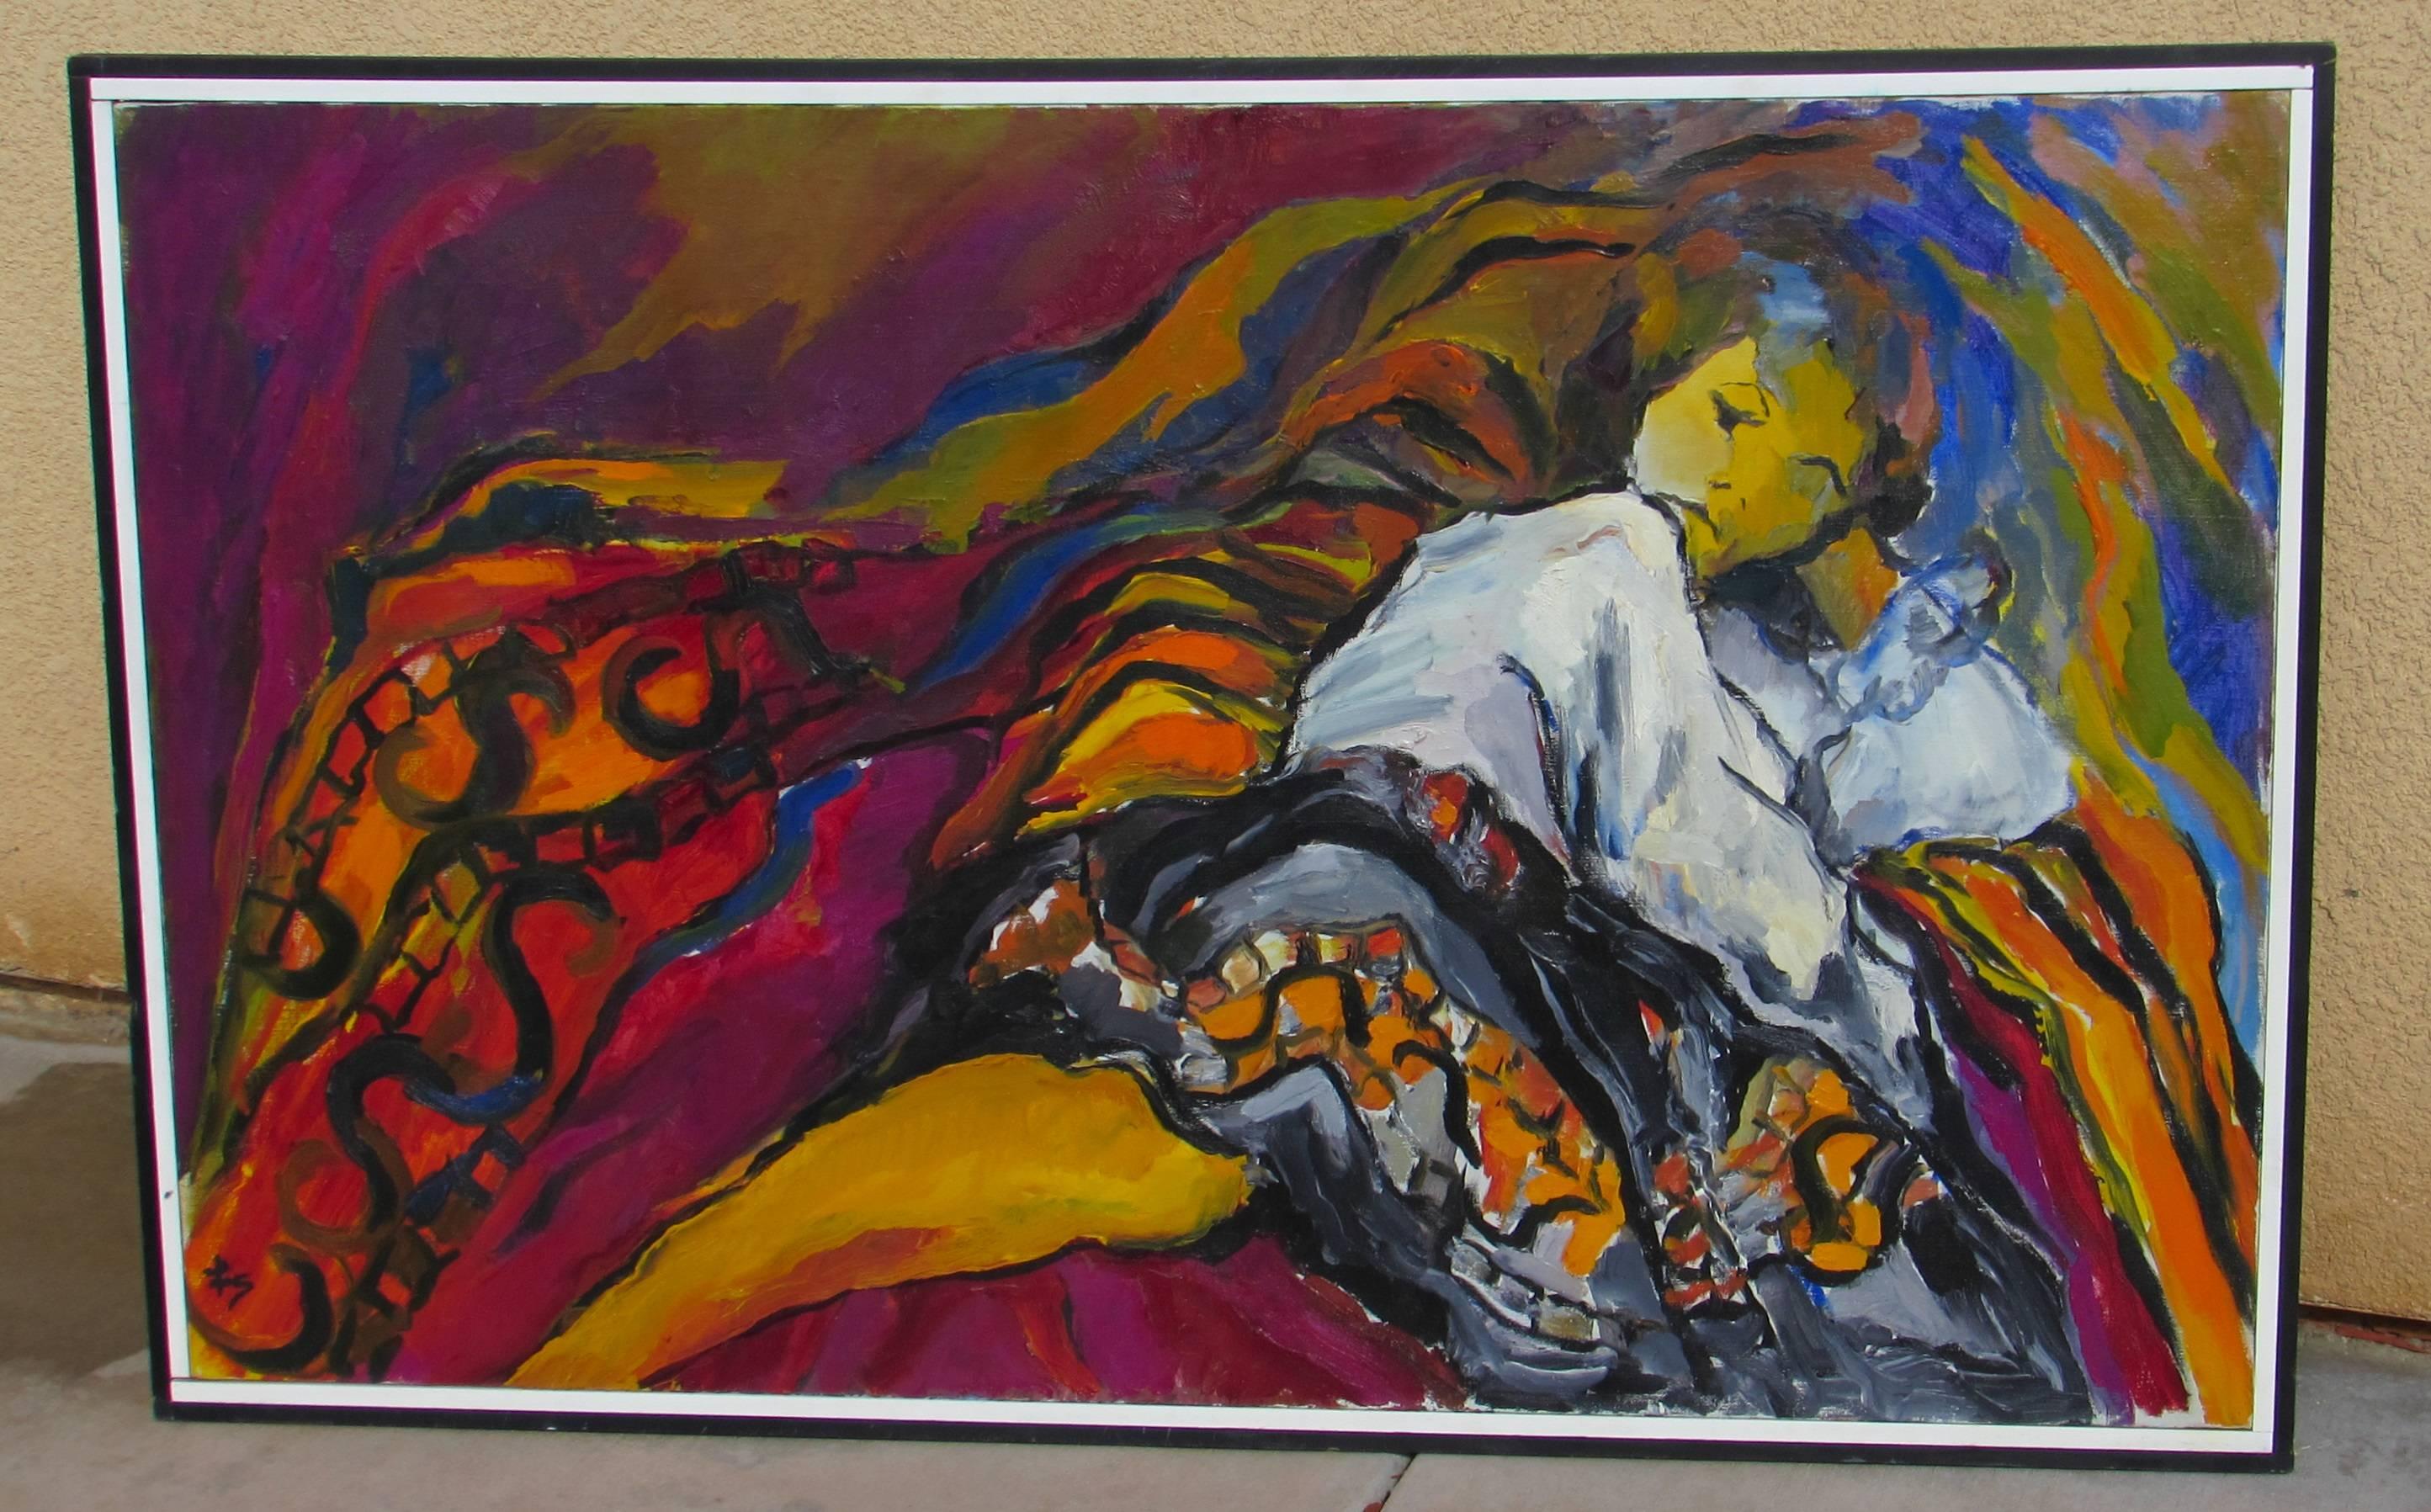 Reclining Woman - Expressionist Painting by Fay Singer